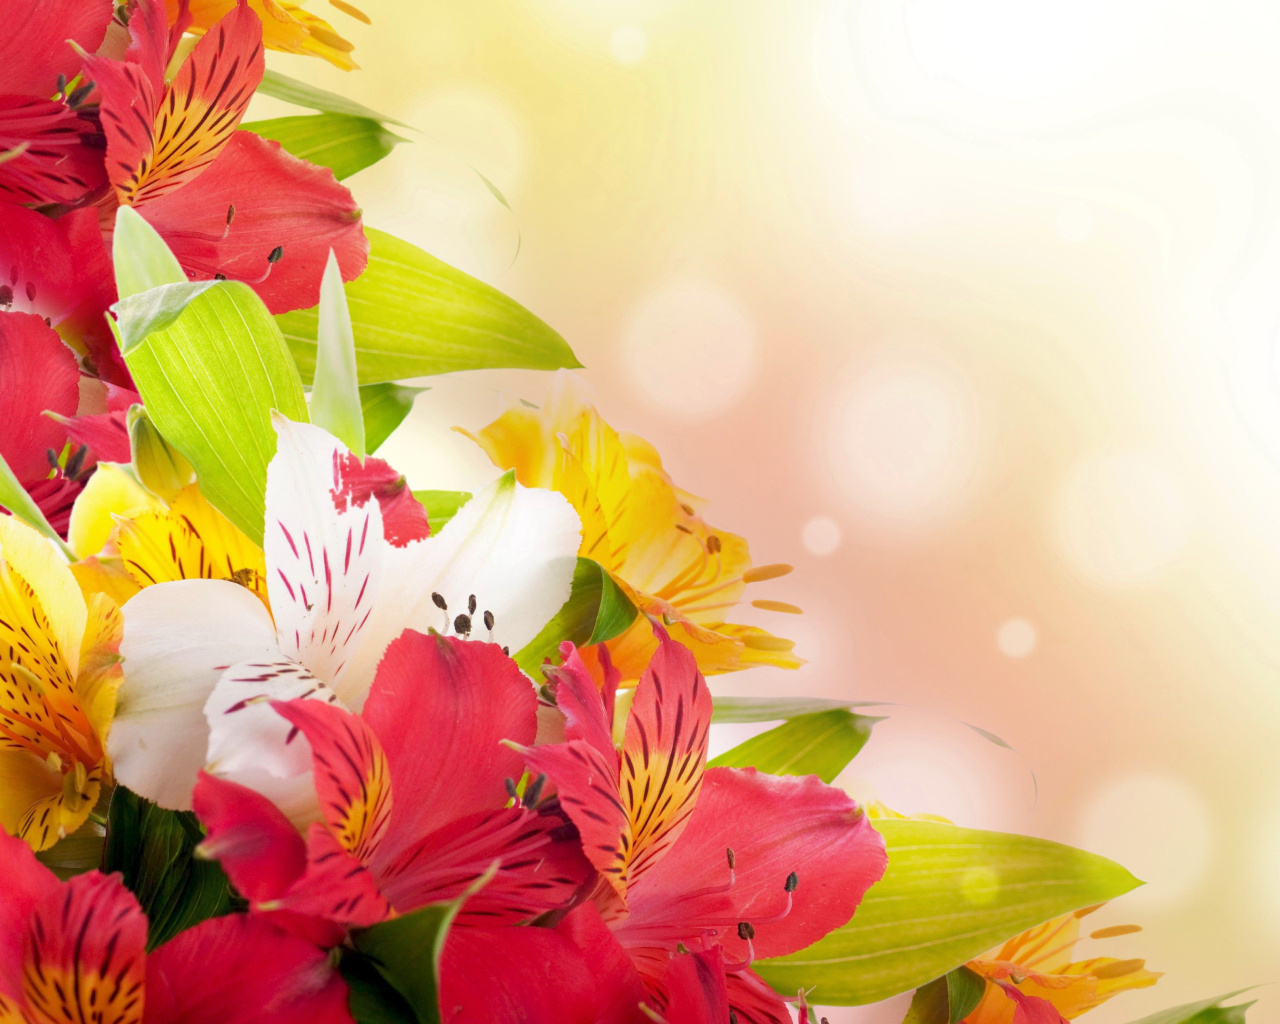 Flowers for the holiday of March 8 wallpaper 1280x1024